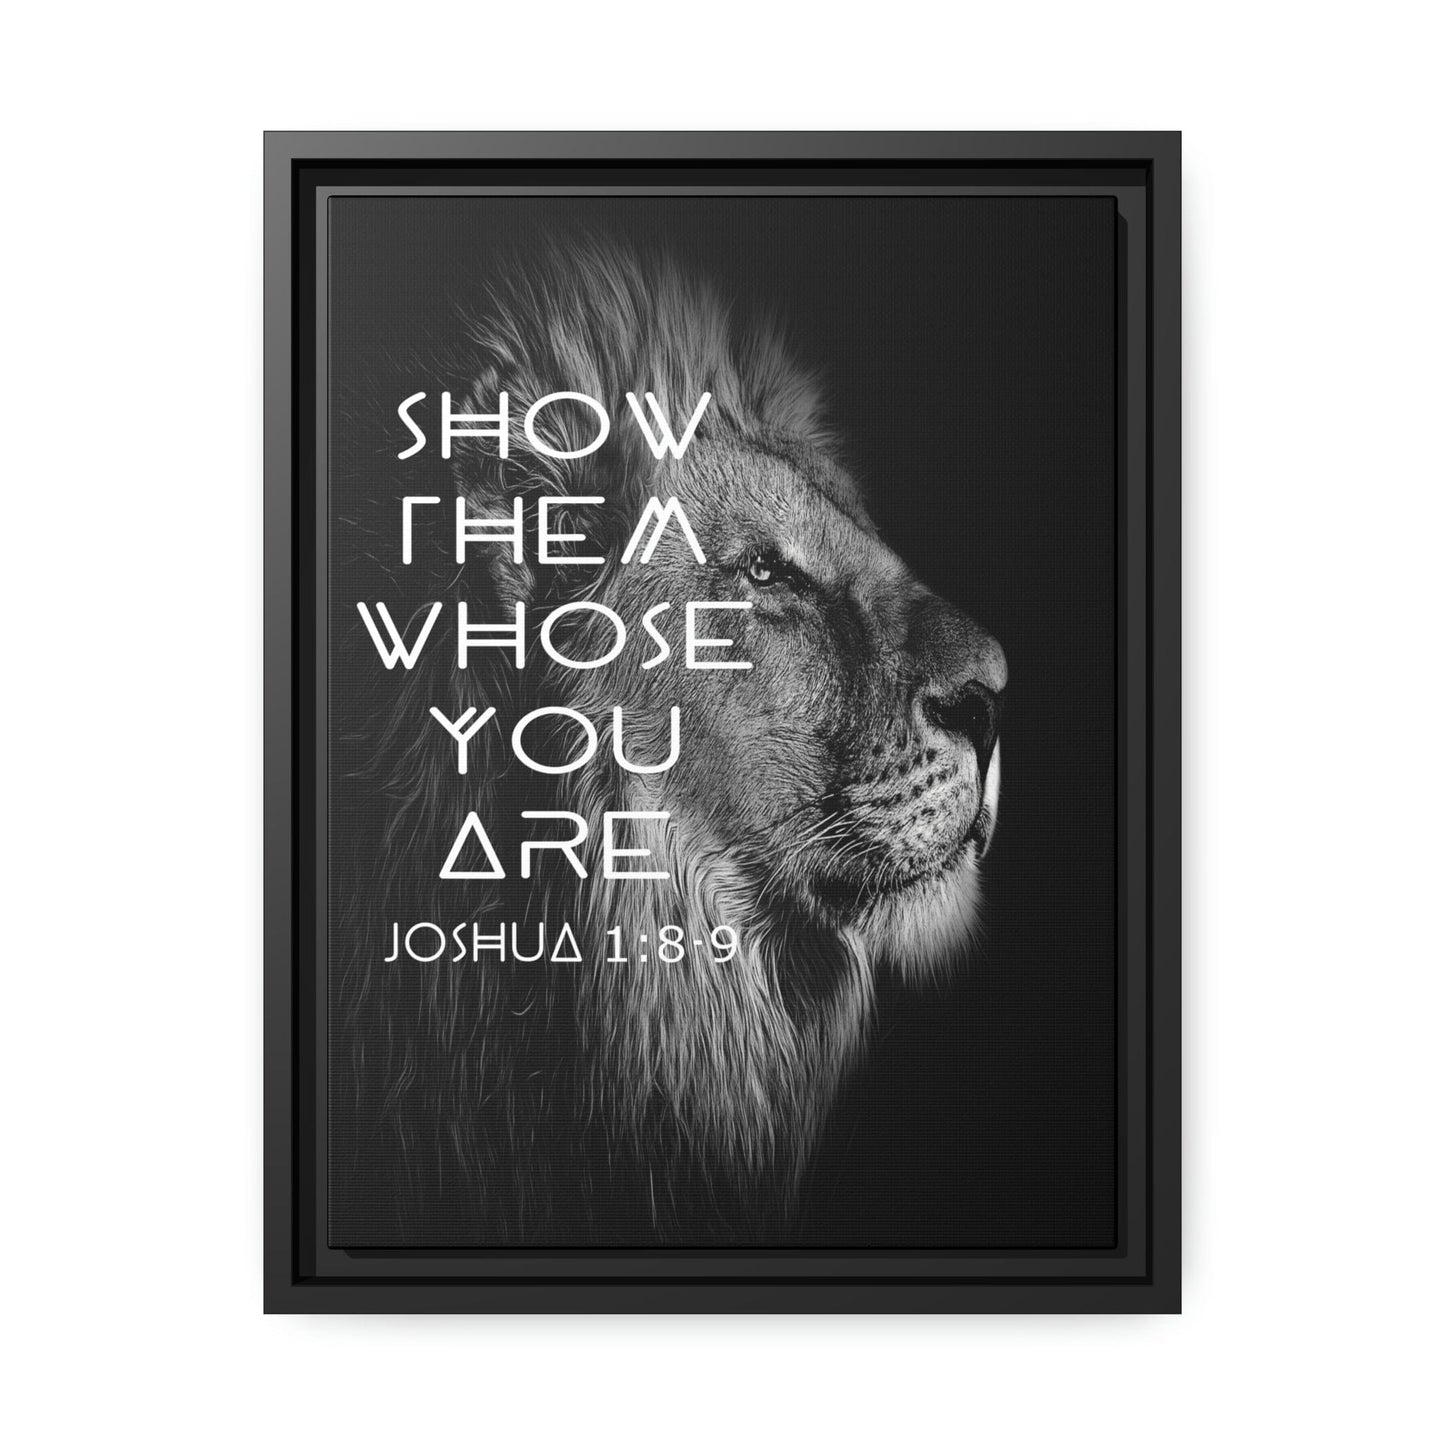 Printify Canvas 12″ x 16″ (Vertical) / Black / 1.25" Show Them Whose You Are - Joshua 1:8-9 Christian Canvas Wall Art